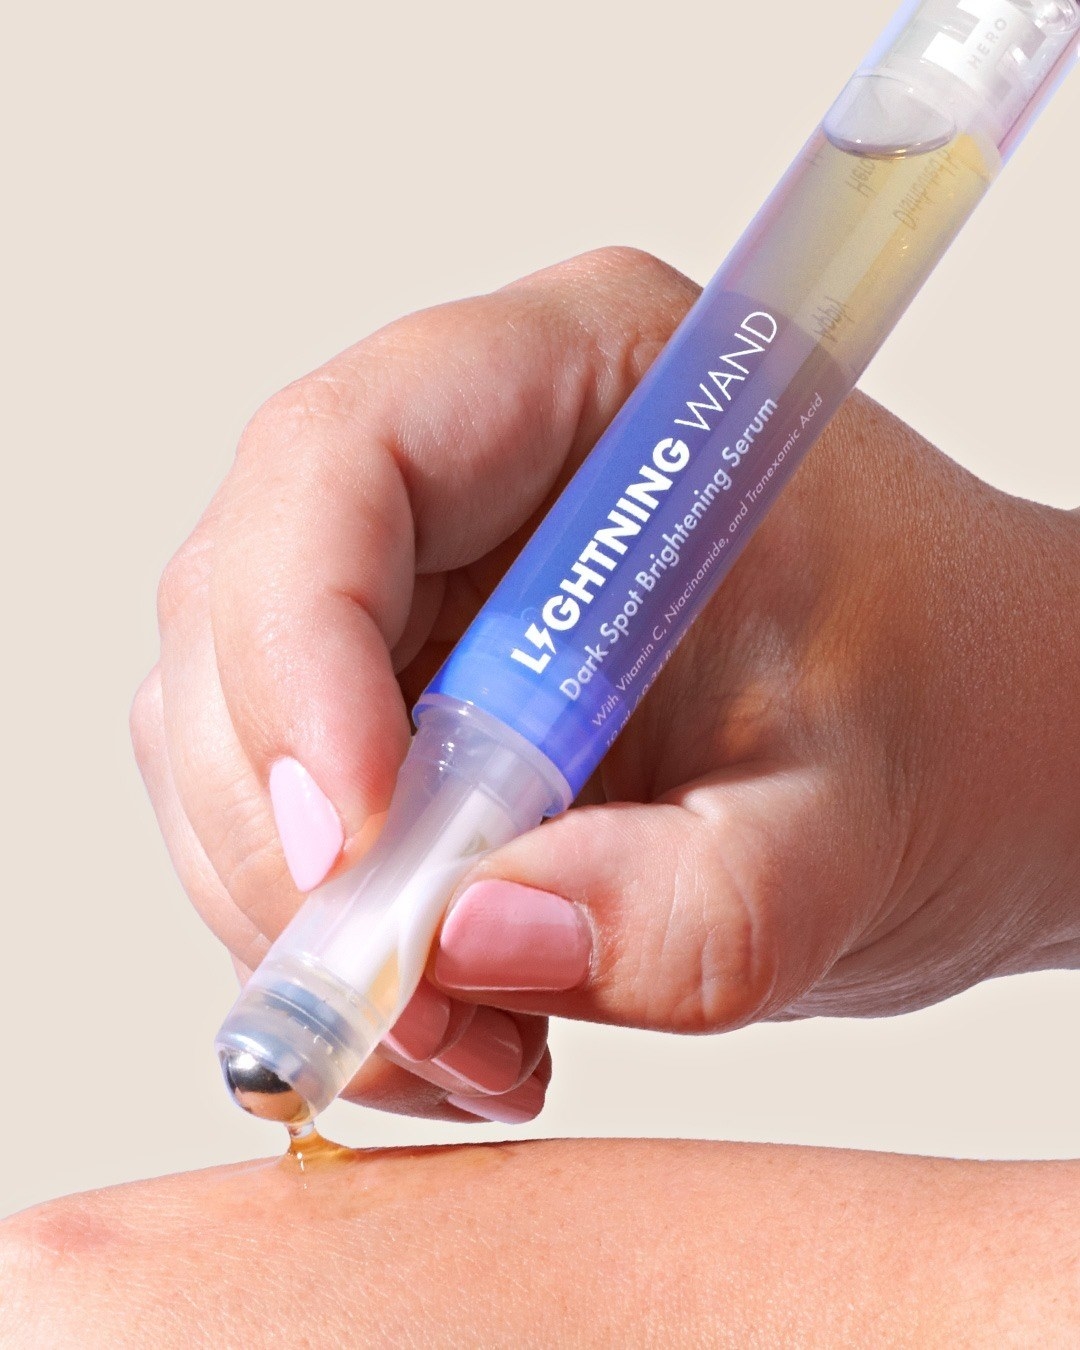 A person rolling the serum over their hand using the rollerball tip